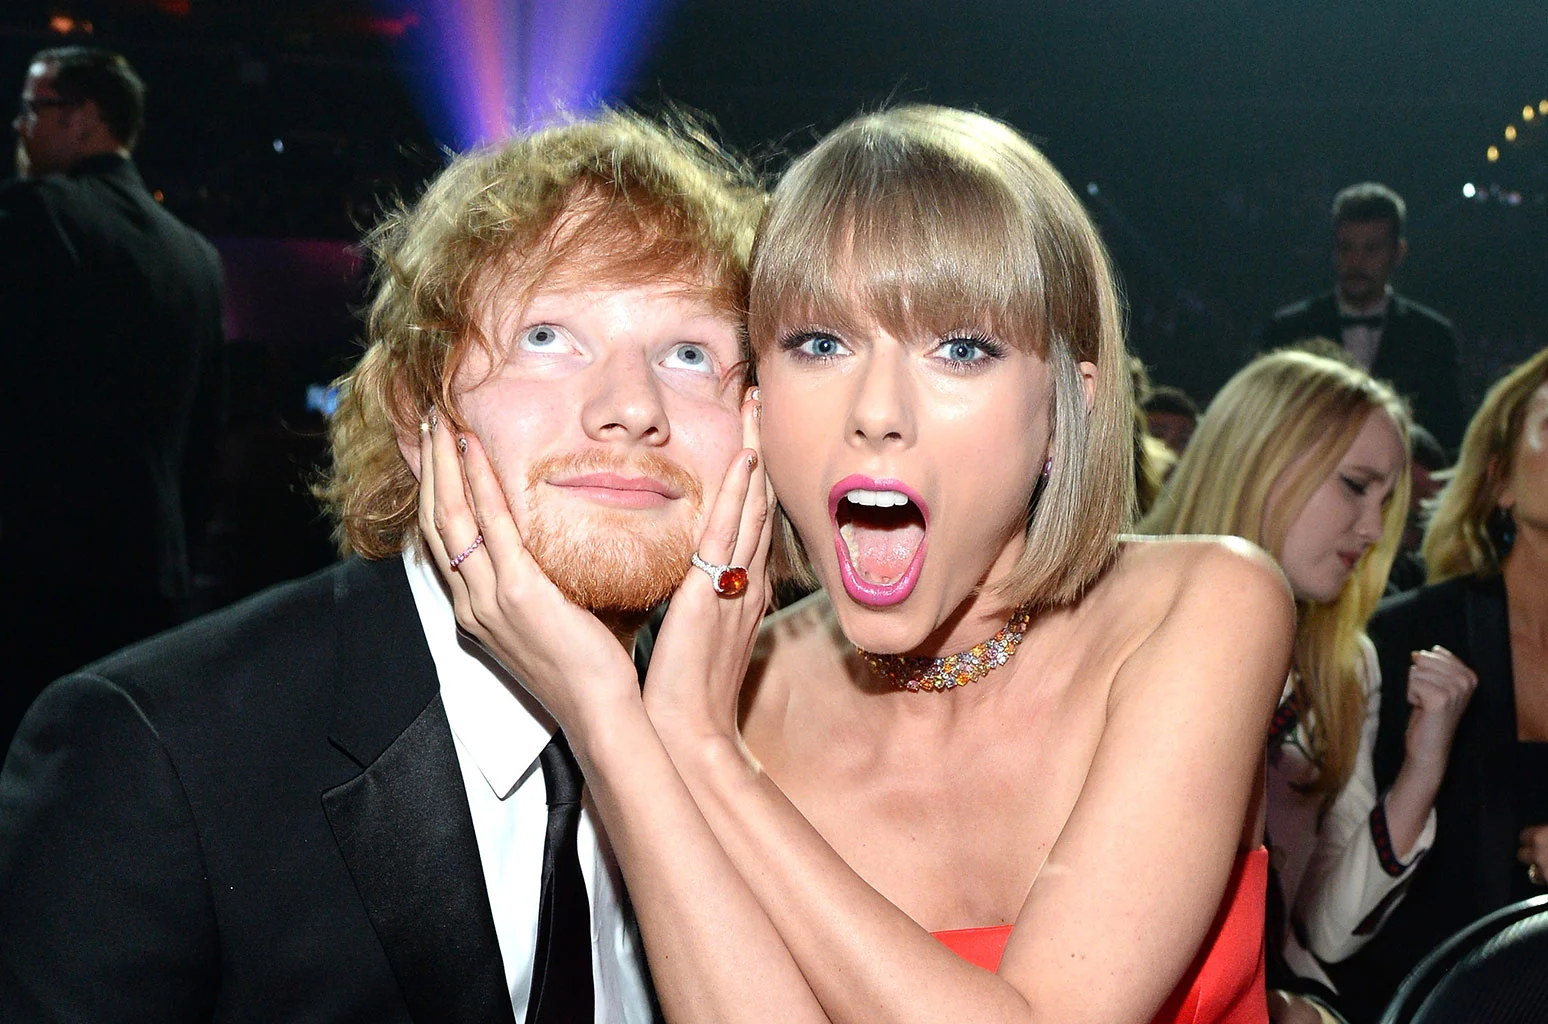 Ed Sheeran - The Joker And The Queen (feat. Taylor Swift) Mp3 Download 